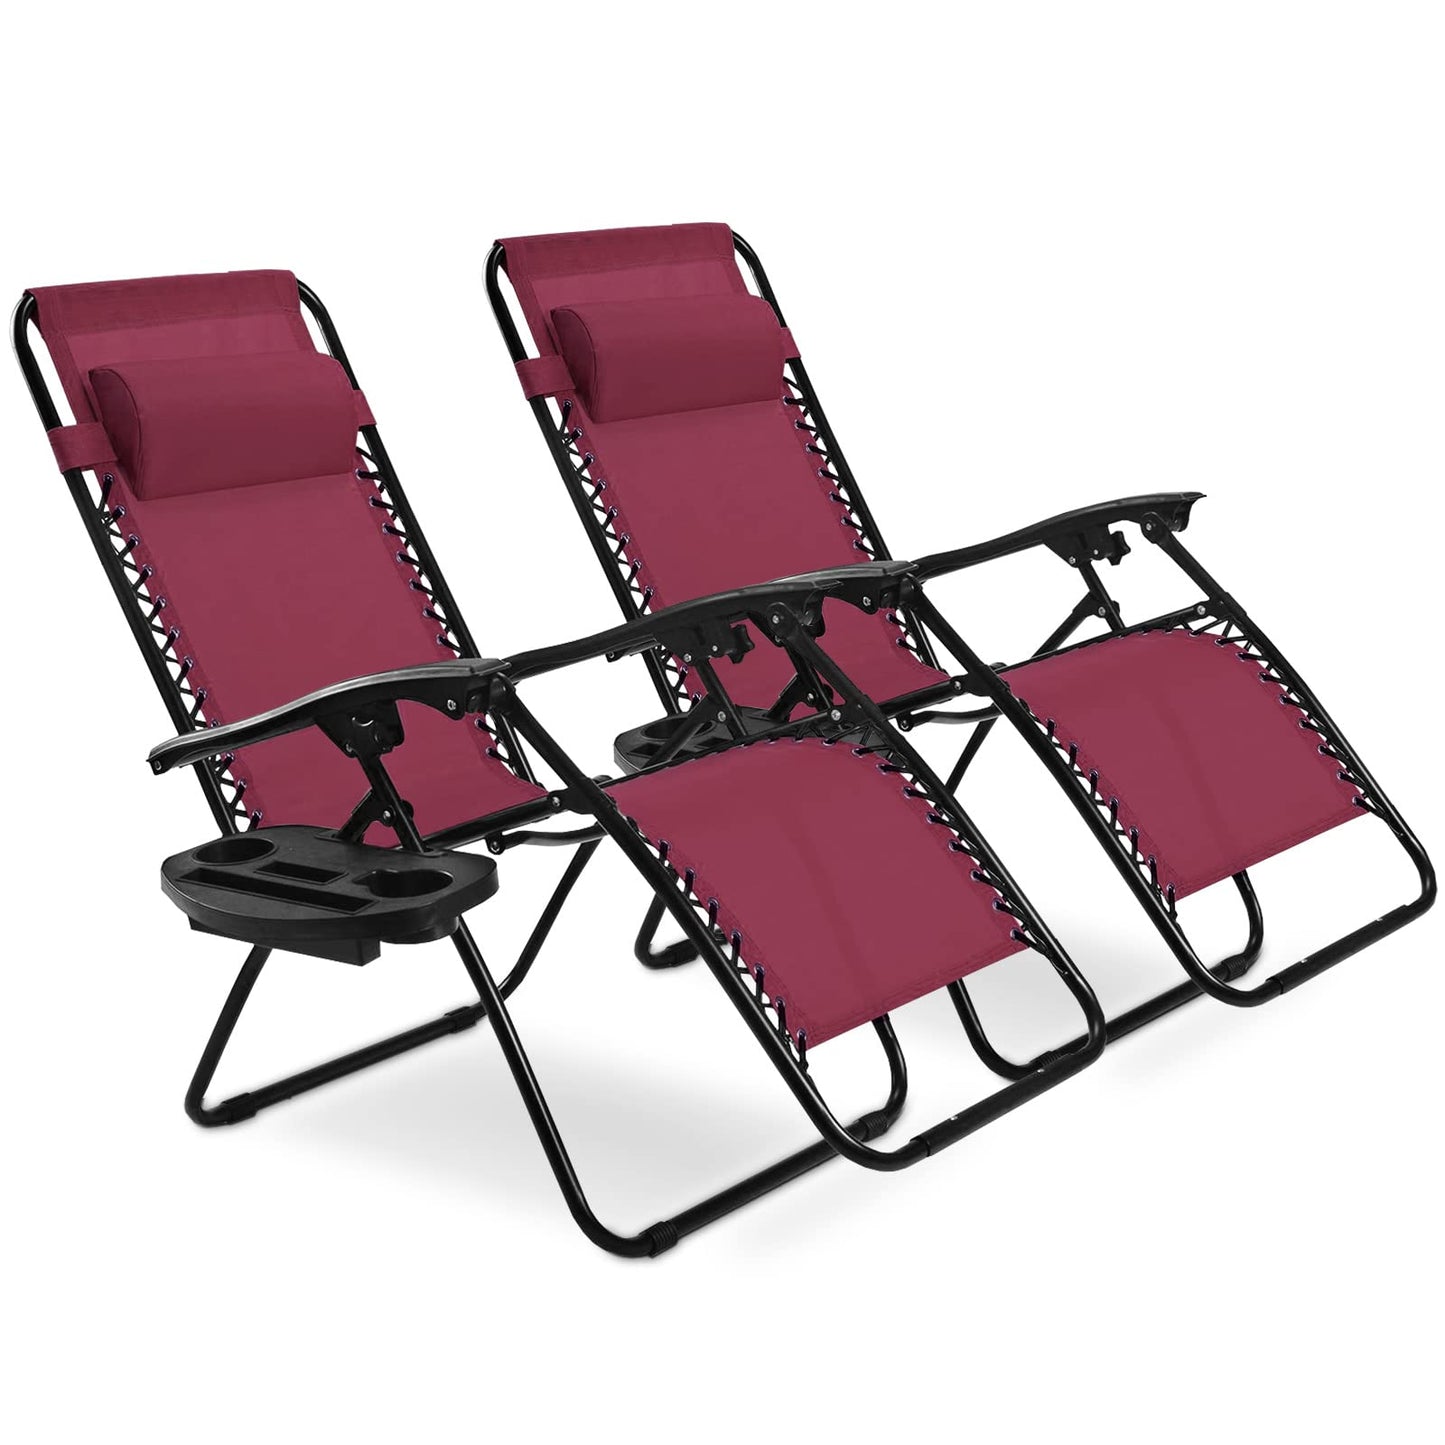 Goplus Zero Gravity Chair, Adjustable Folding Reclining Lounge Chair with Pillow and Cup Holder, Patio Lawn Recliner for Outdoor Pool Camp Yard (Set of 2, Wine) set of 2